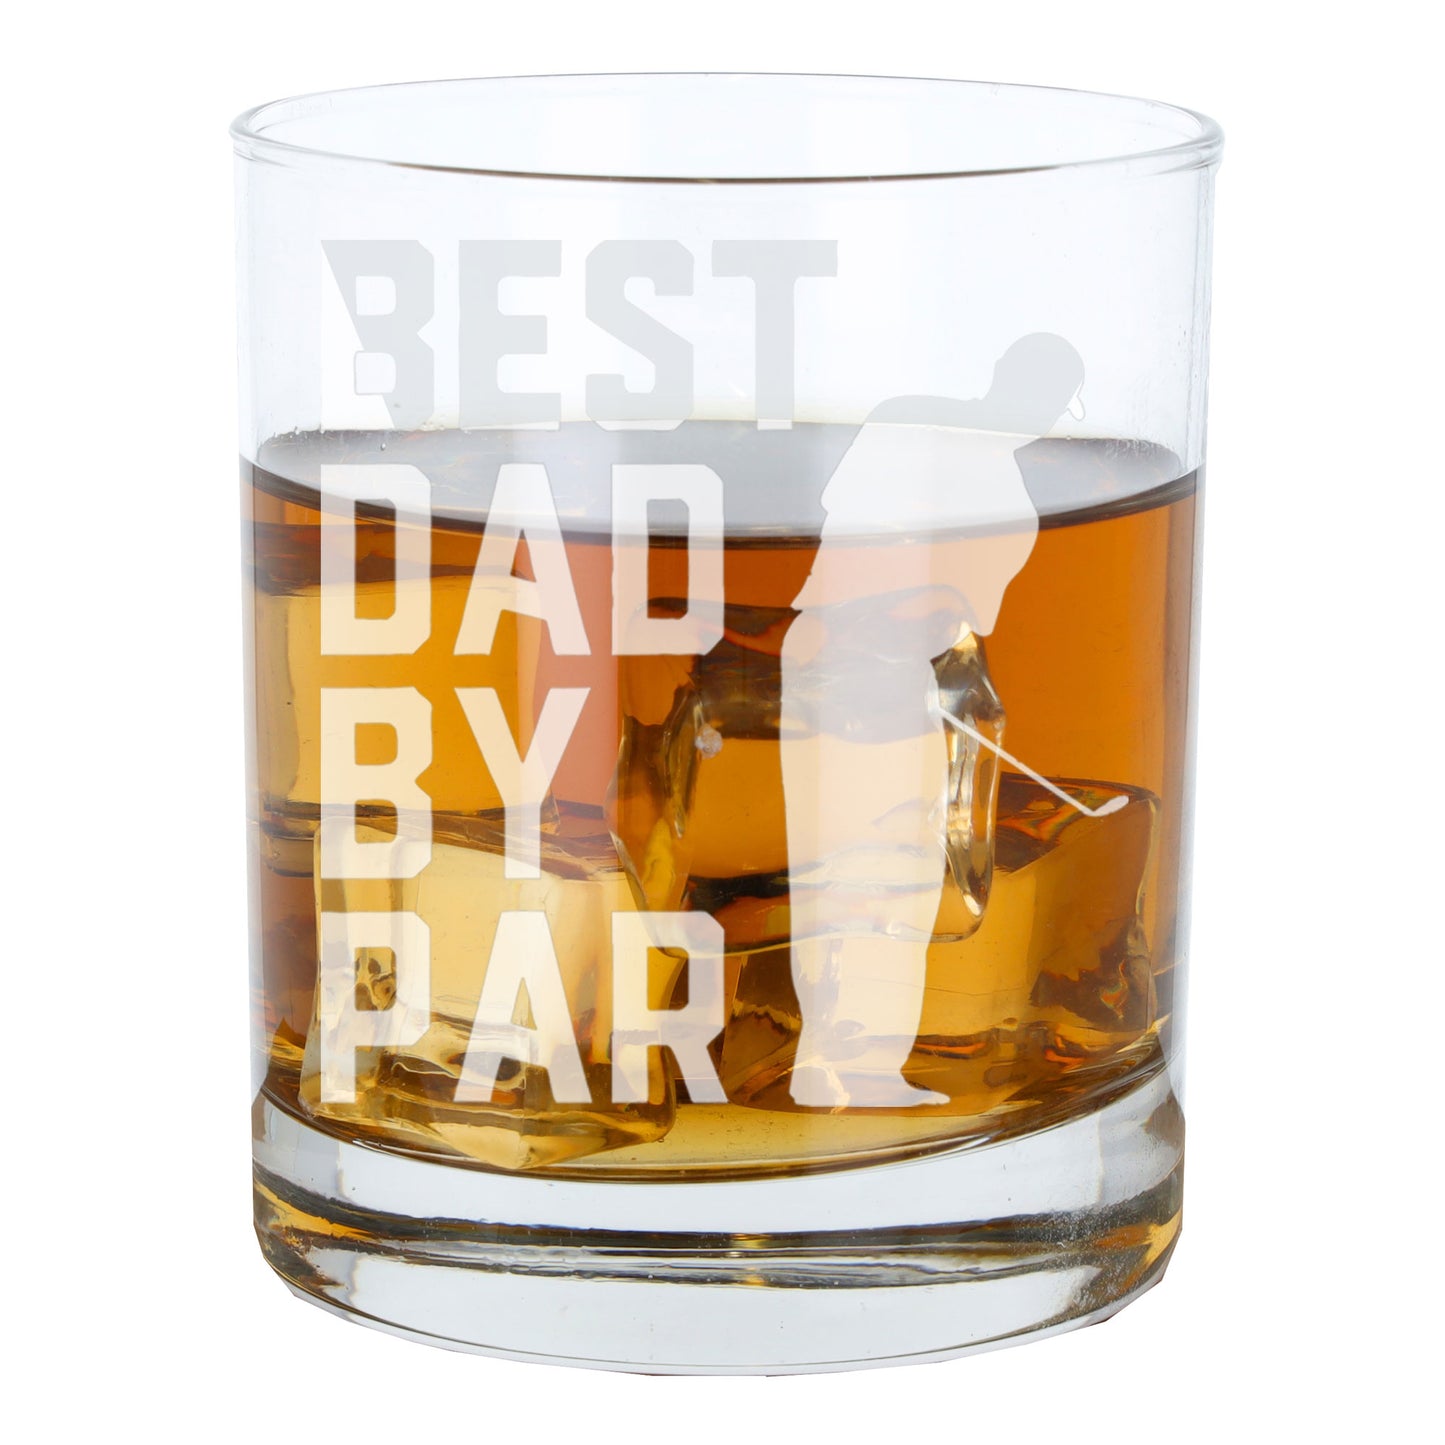 Best Dad By Par Engraved Whisky Glass and/or Coaster Set  - Always Looking Good -   